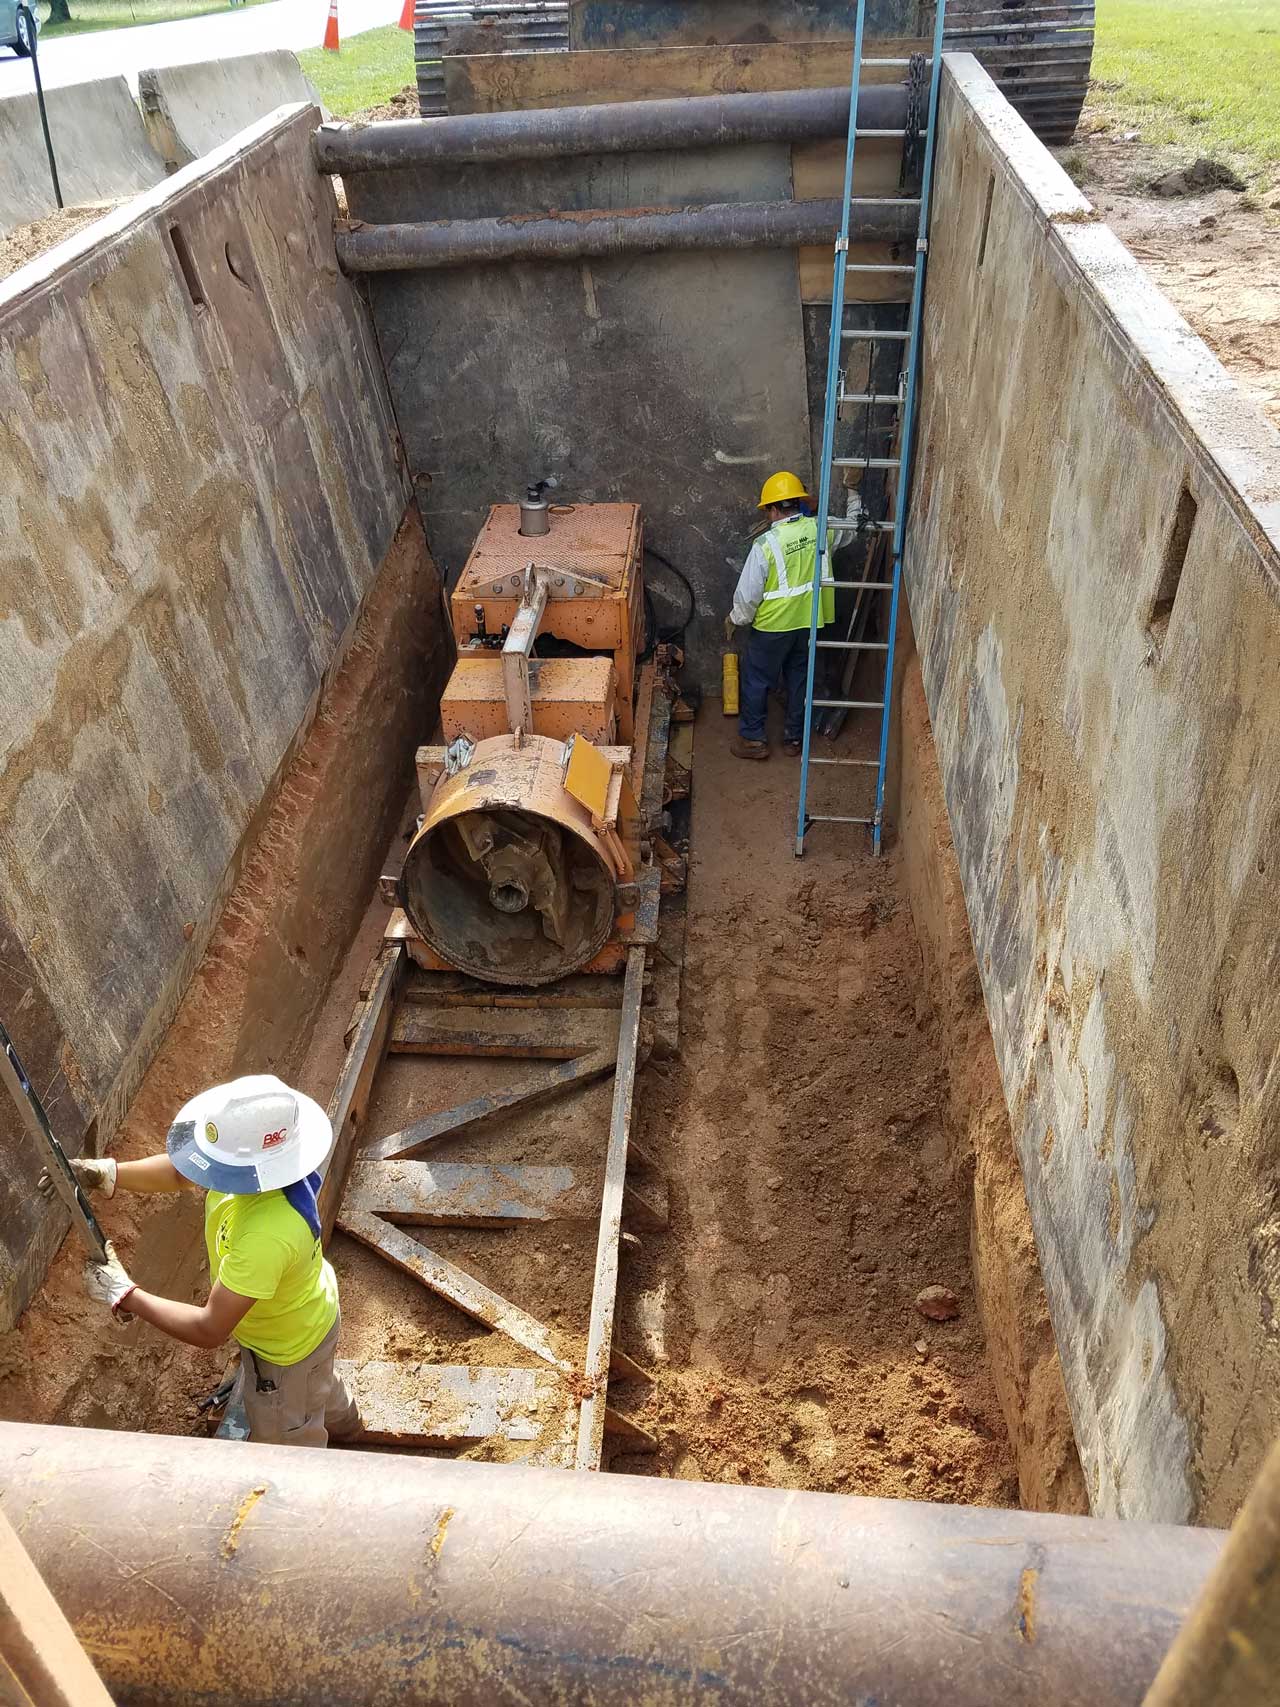 HALL Contracting Employees working in a bore pit